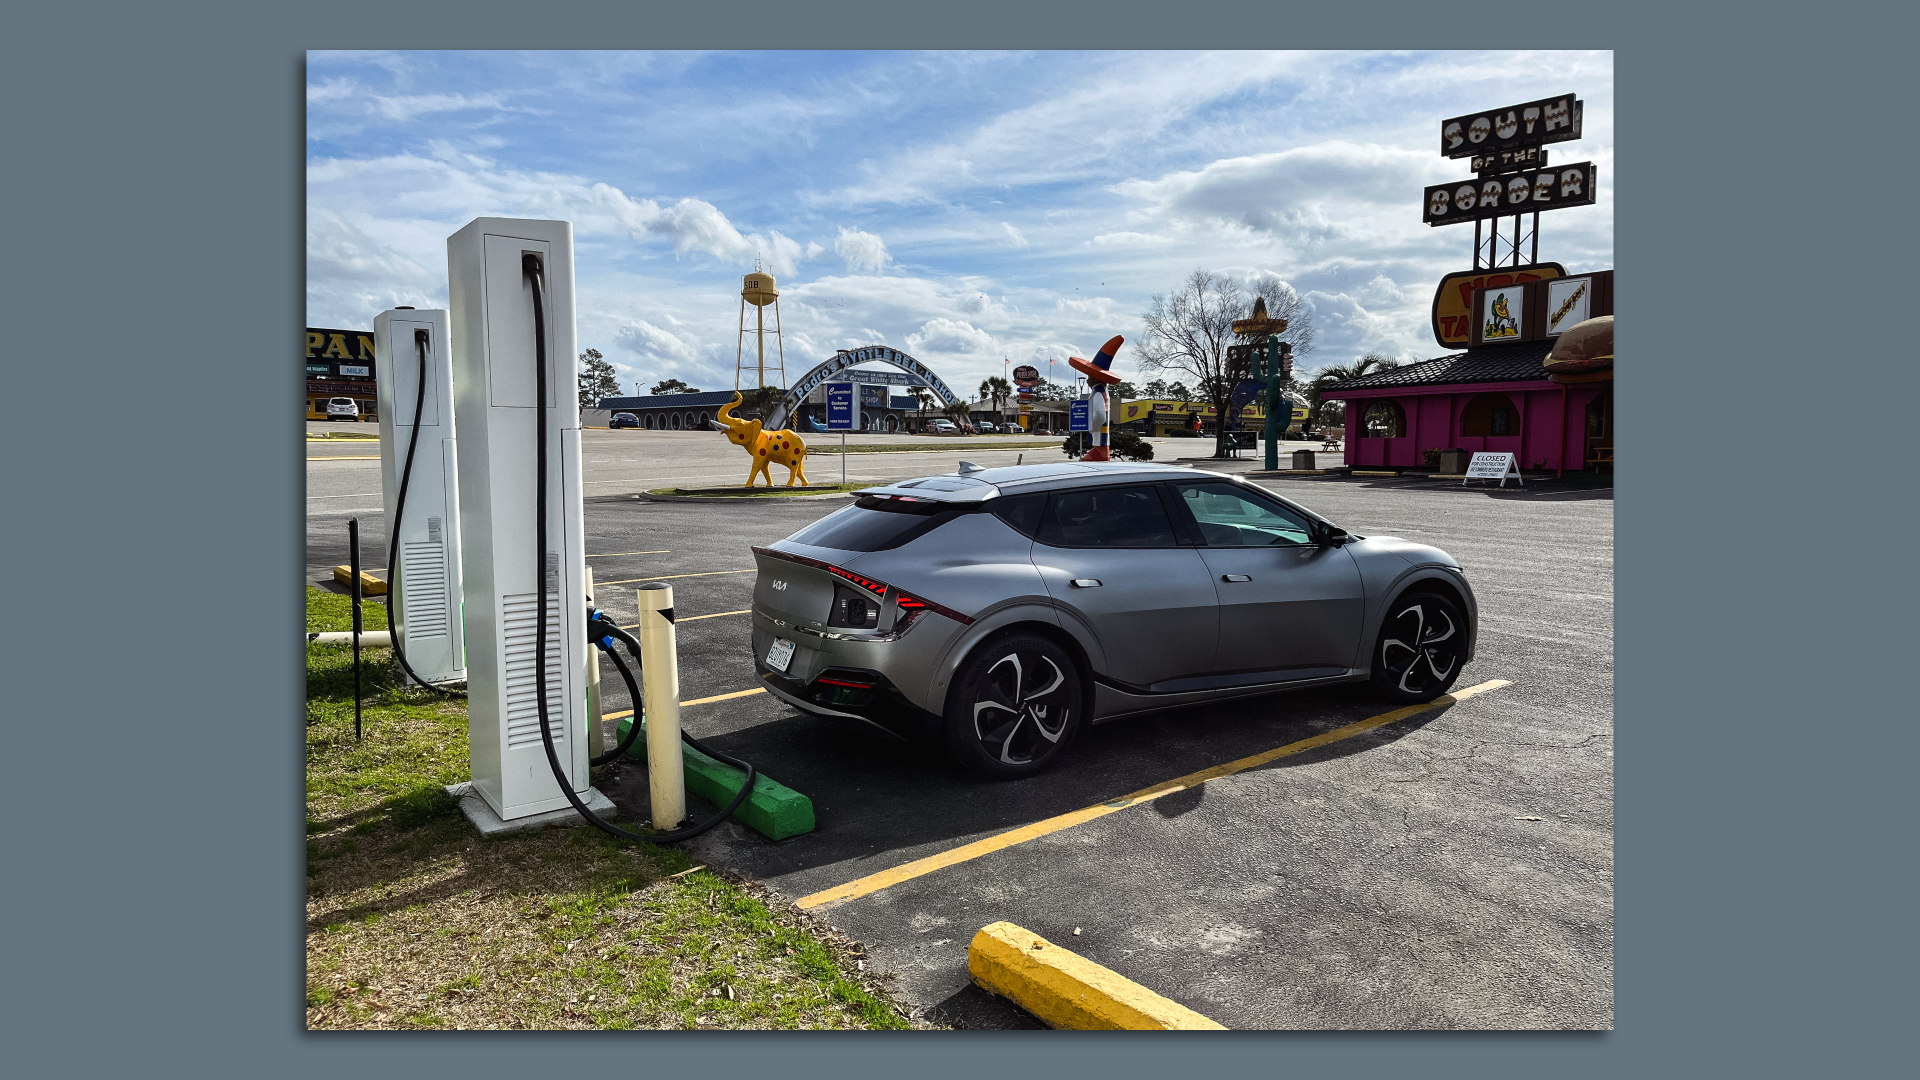 A Kia EV6 electric car recharging at a kitschy roadside attraction called South of the Border in South Carolina.